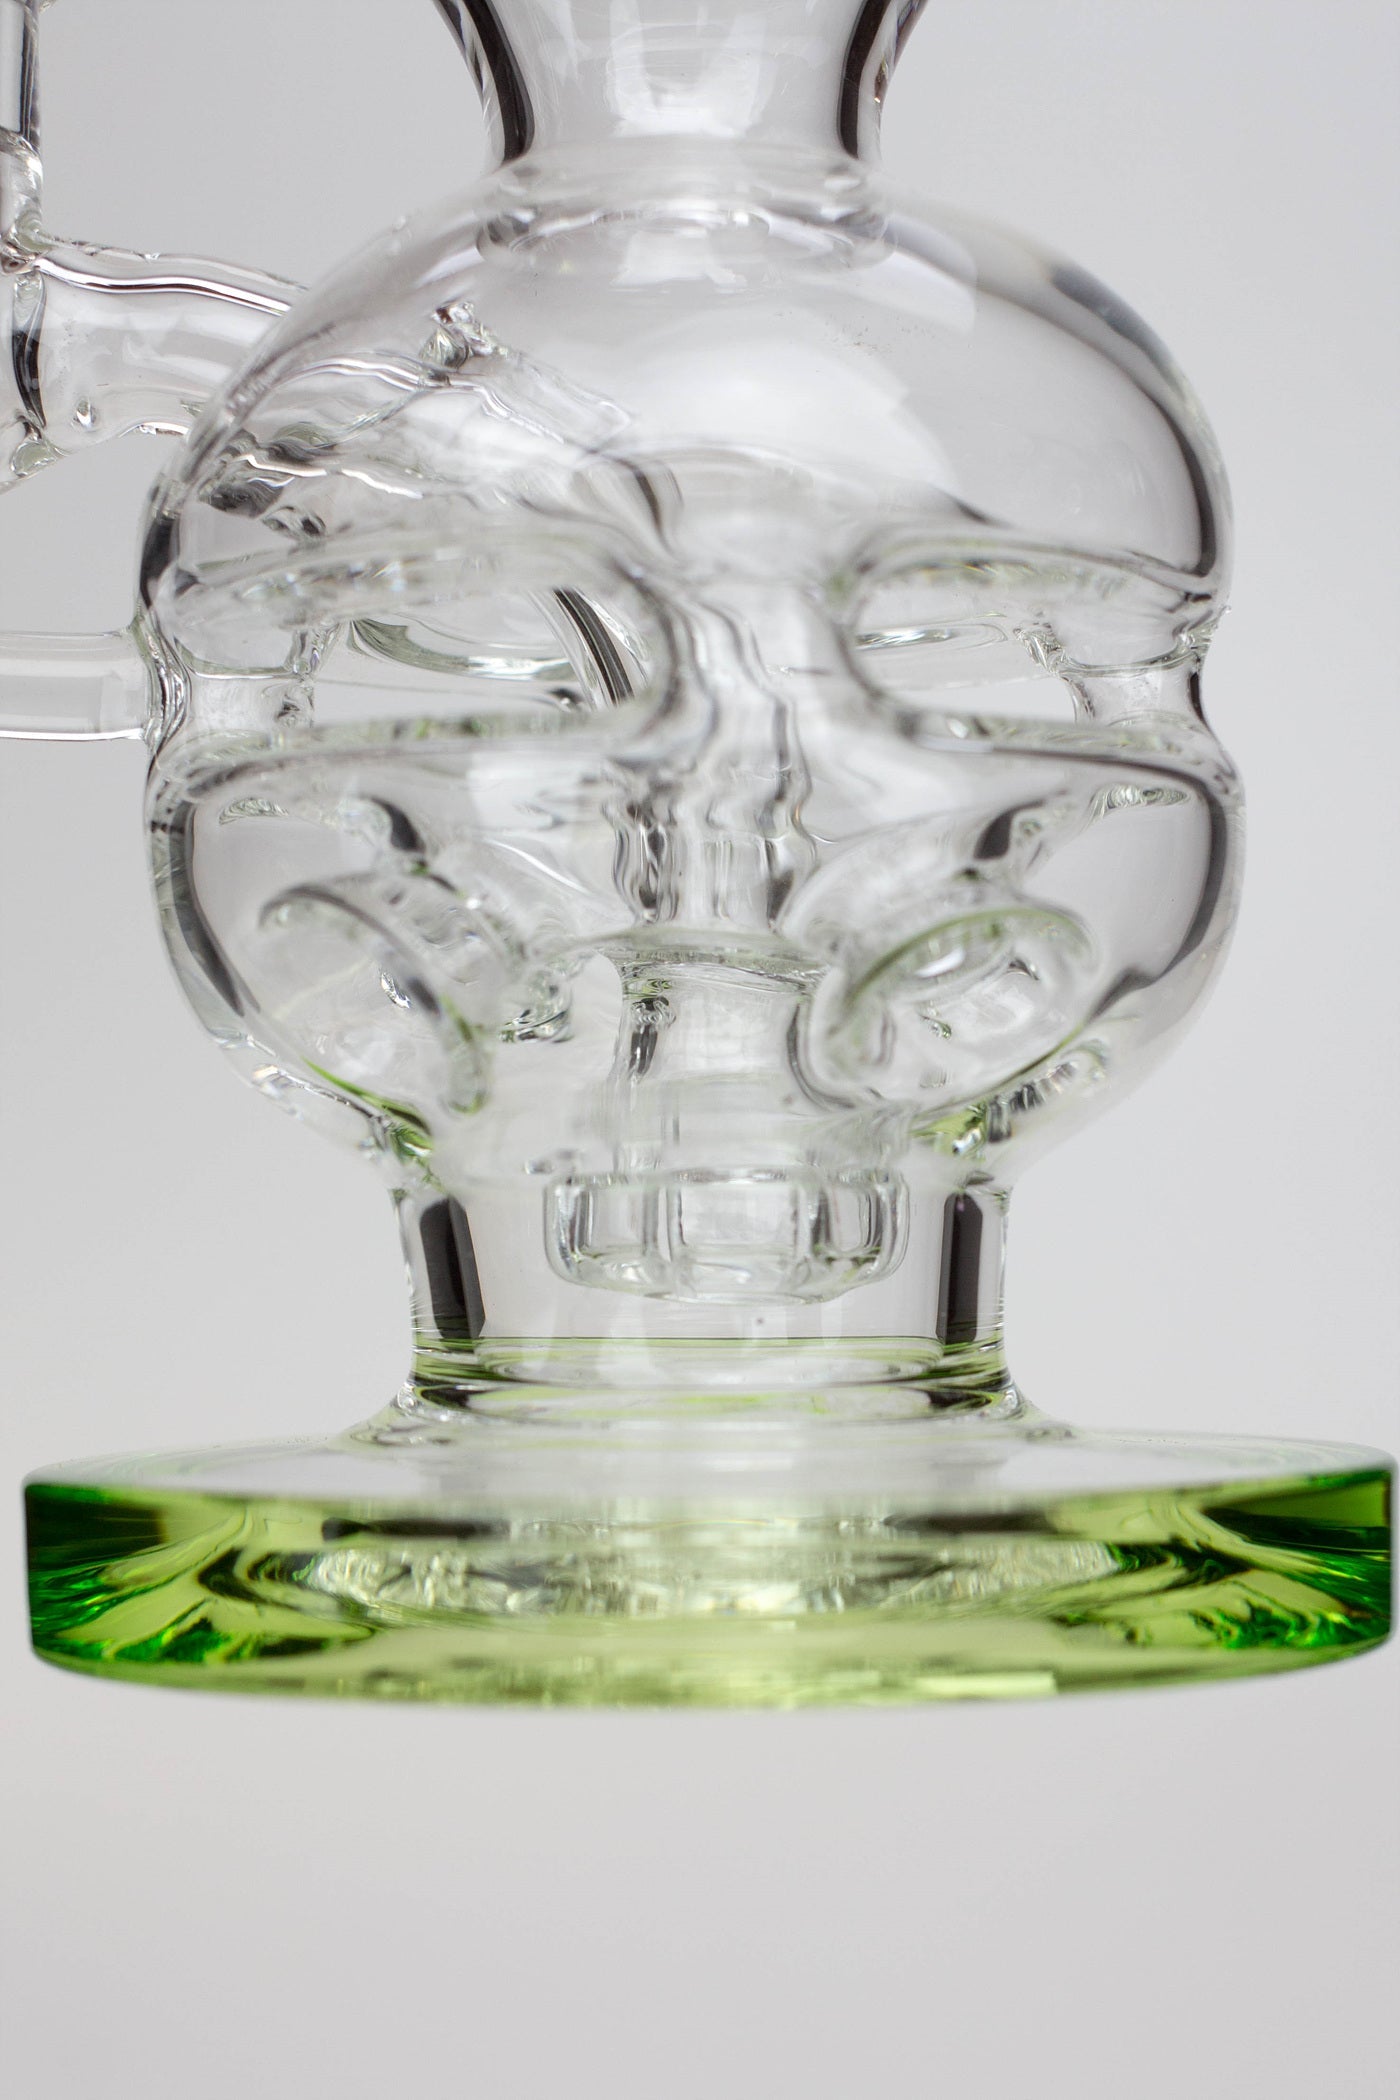 6" Genie Double glass recycle rig with shower head diffuser_2